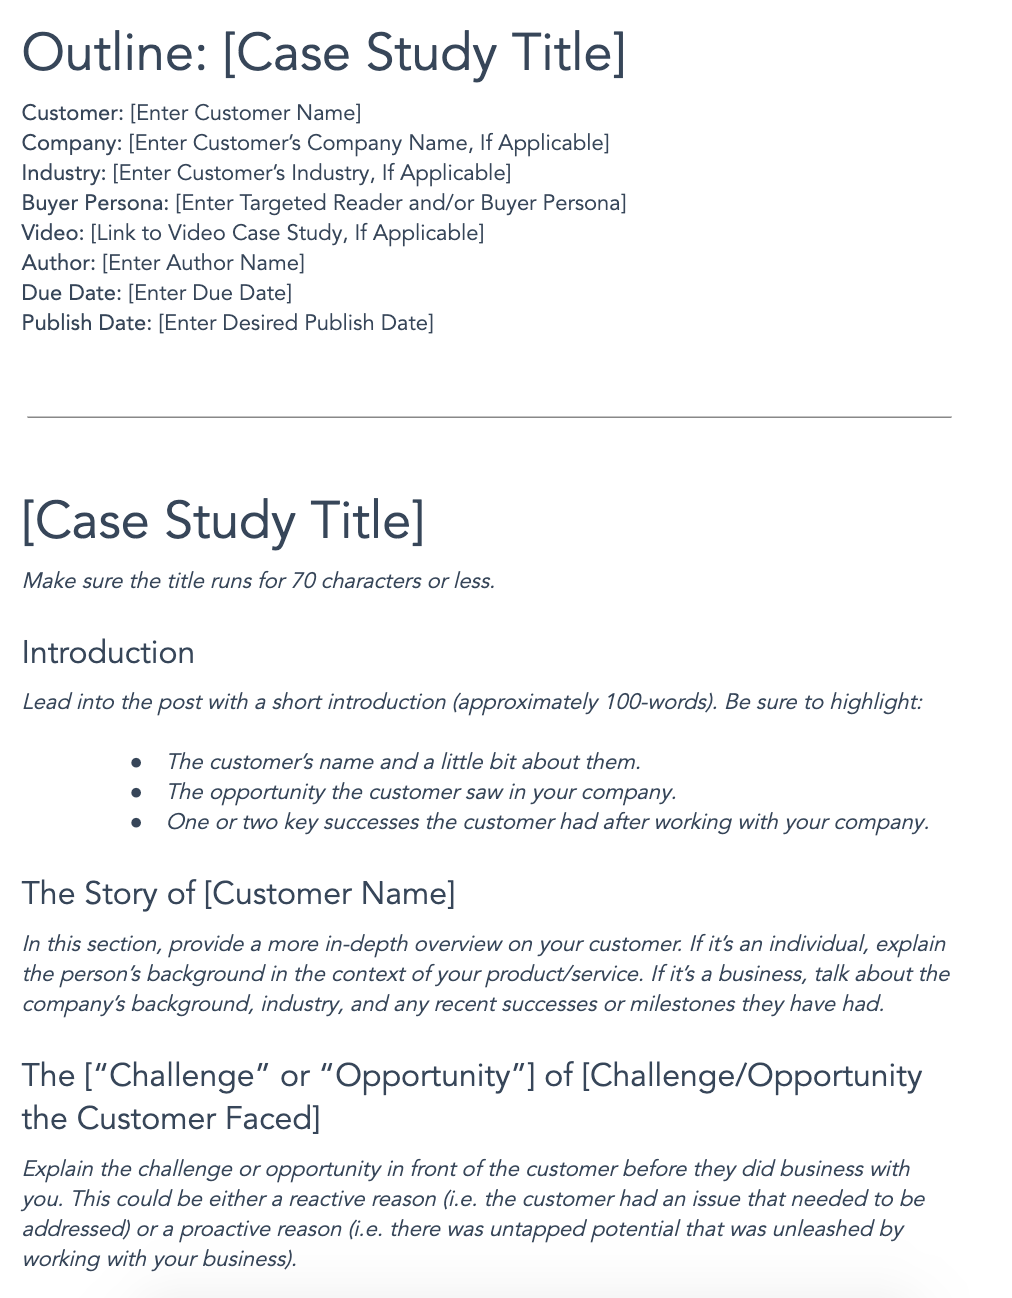 Surrey dye Early 3 Free Case Study Templates | Download Now